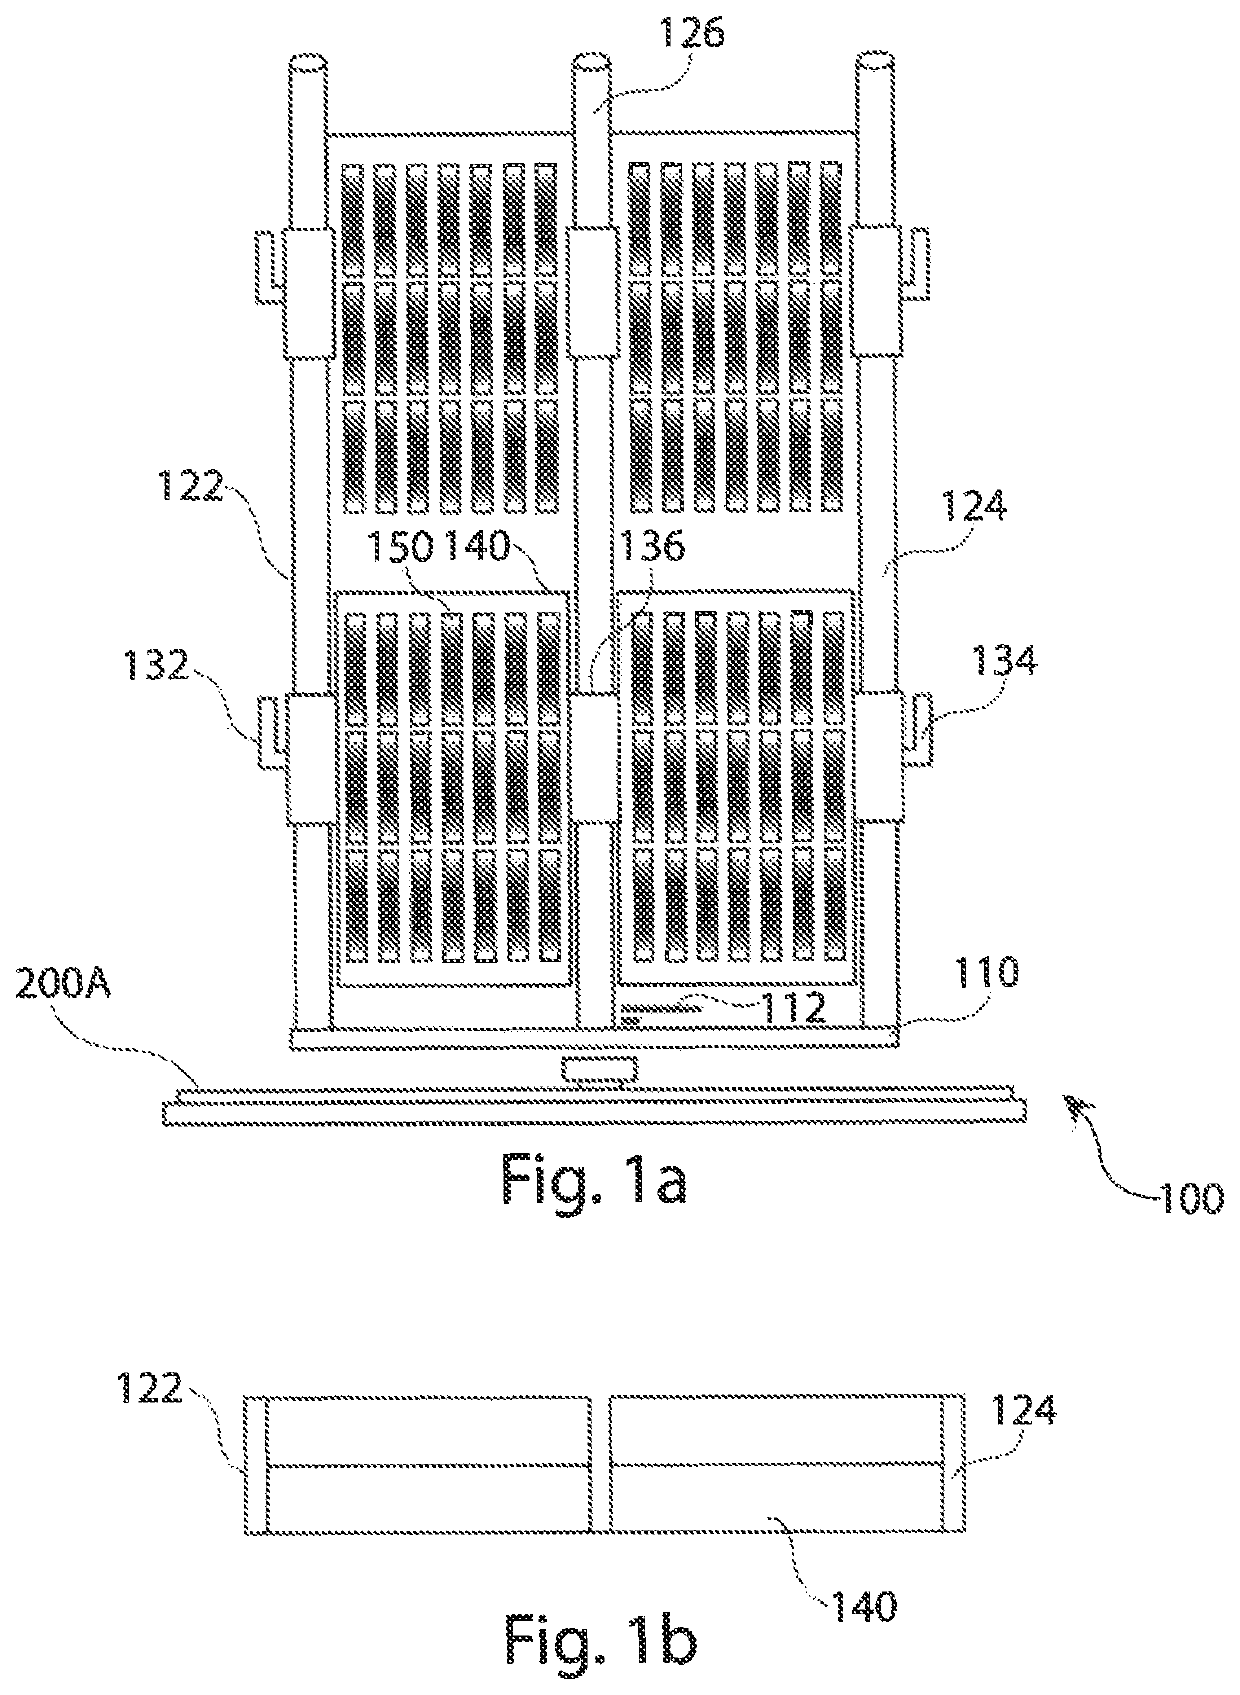 High performance computing rack and storage system with forced cooling